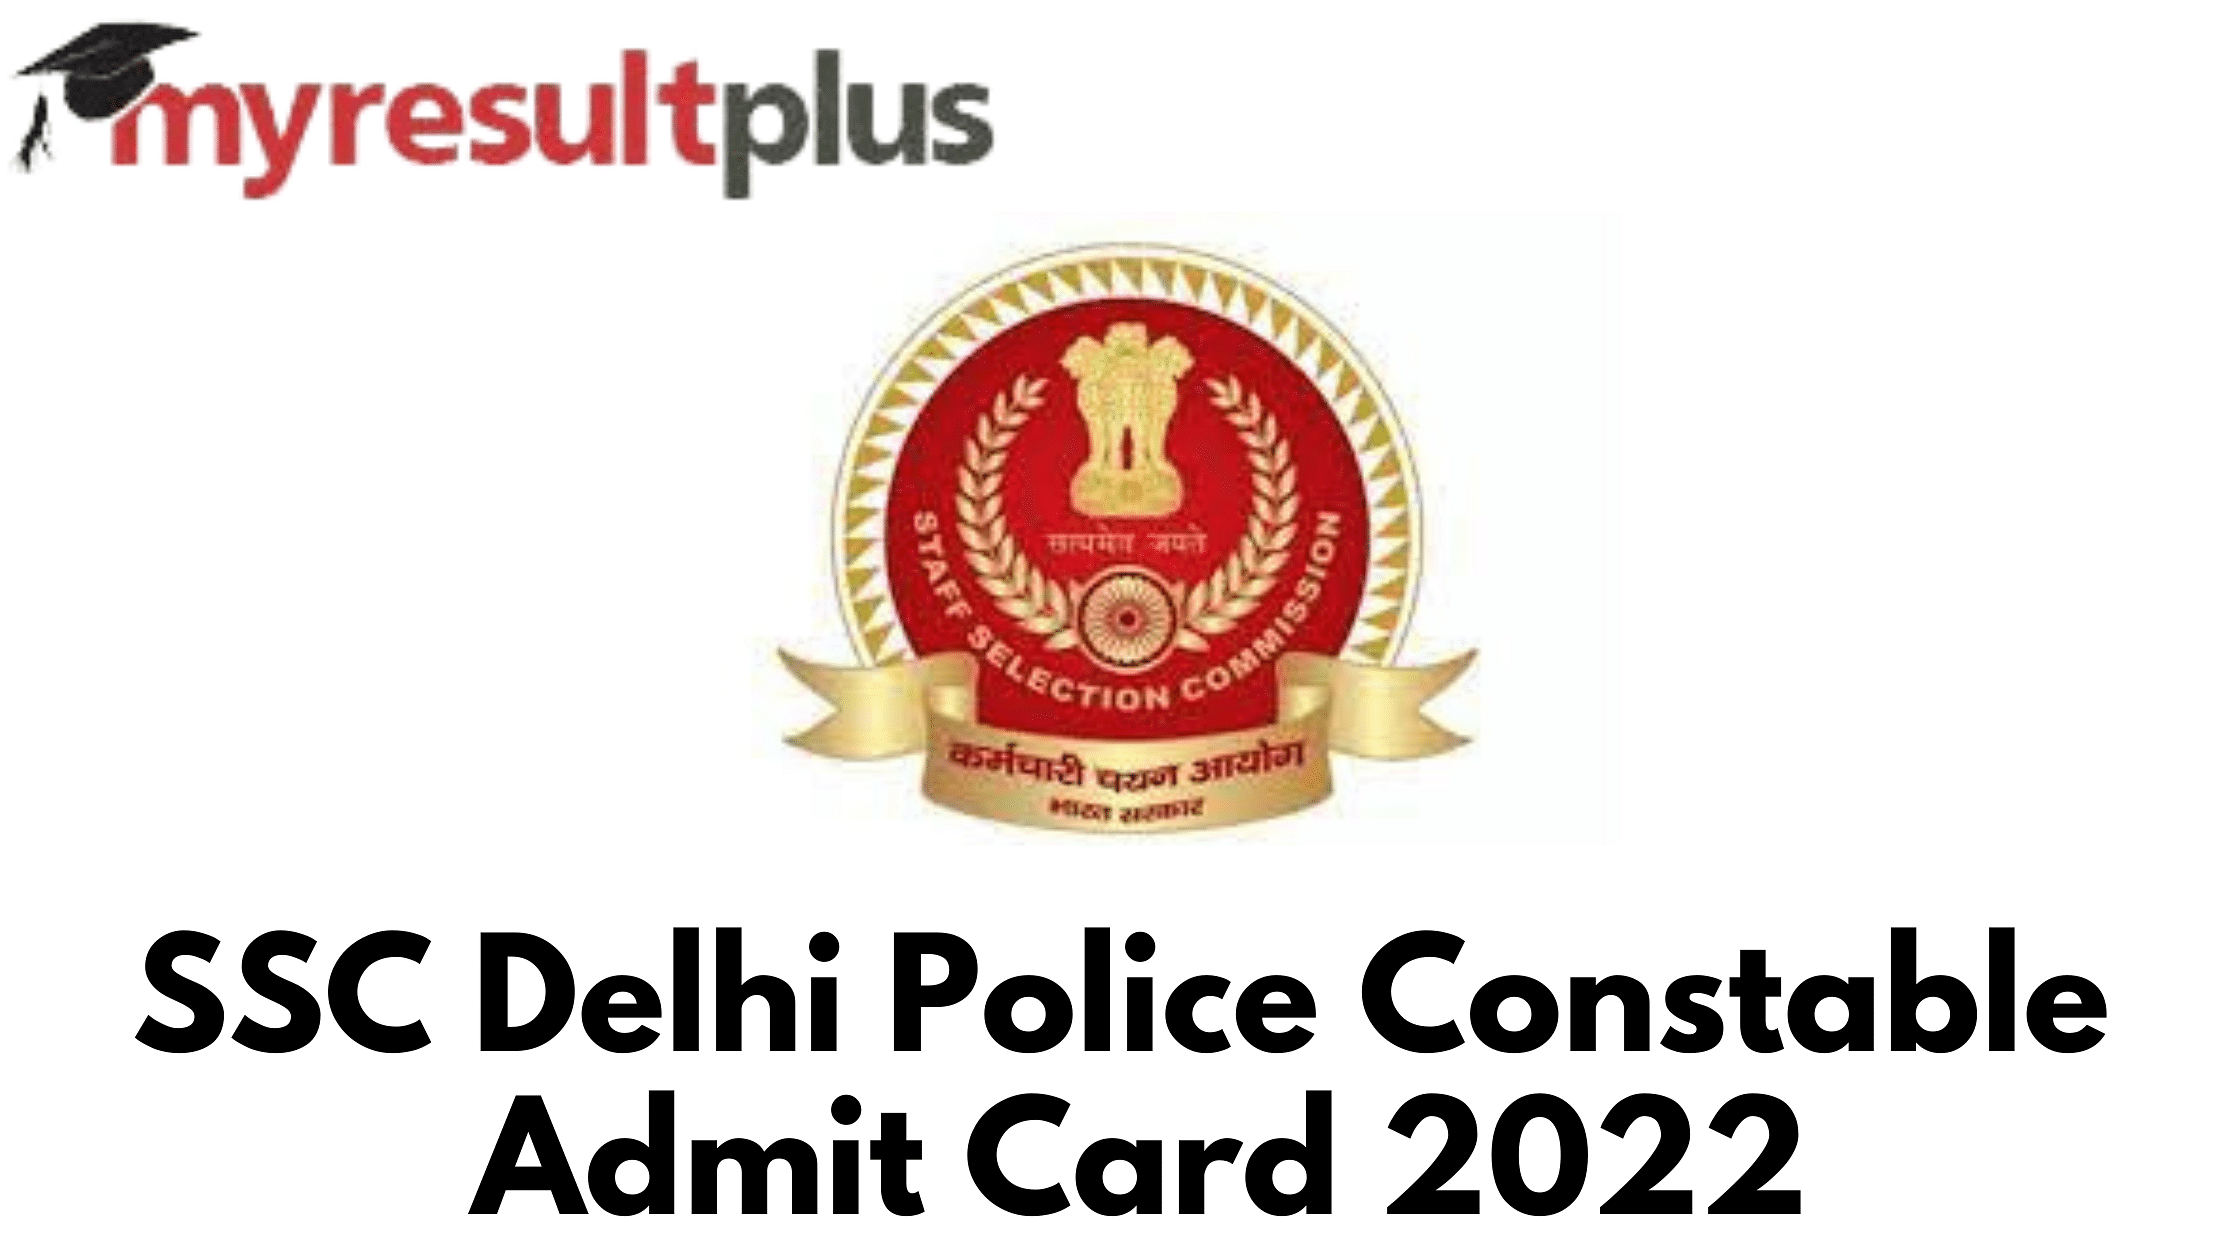 SSC Delhi Police Admit Card 2022 Available for Download, Steps Here